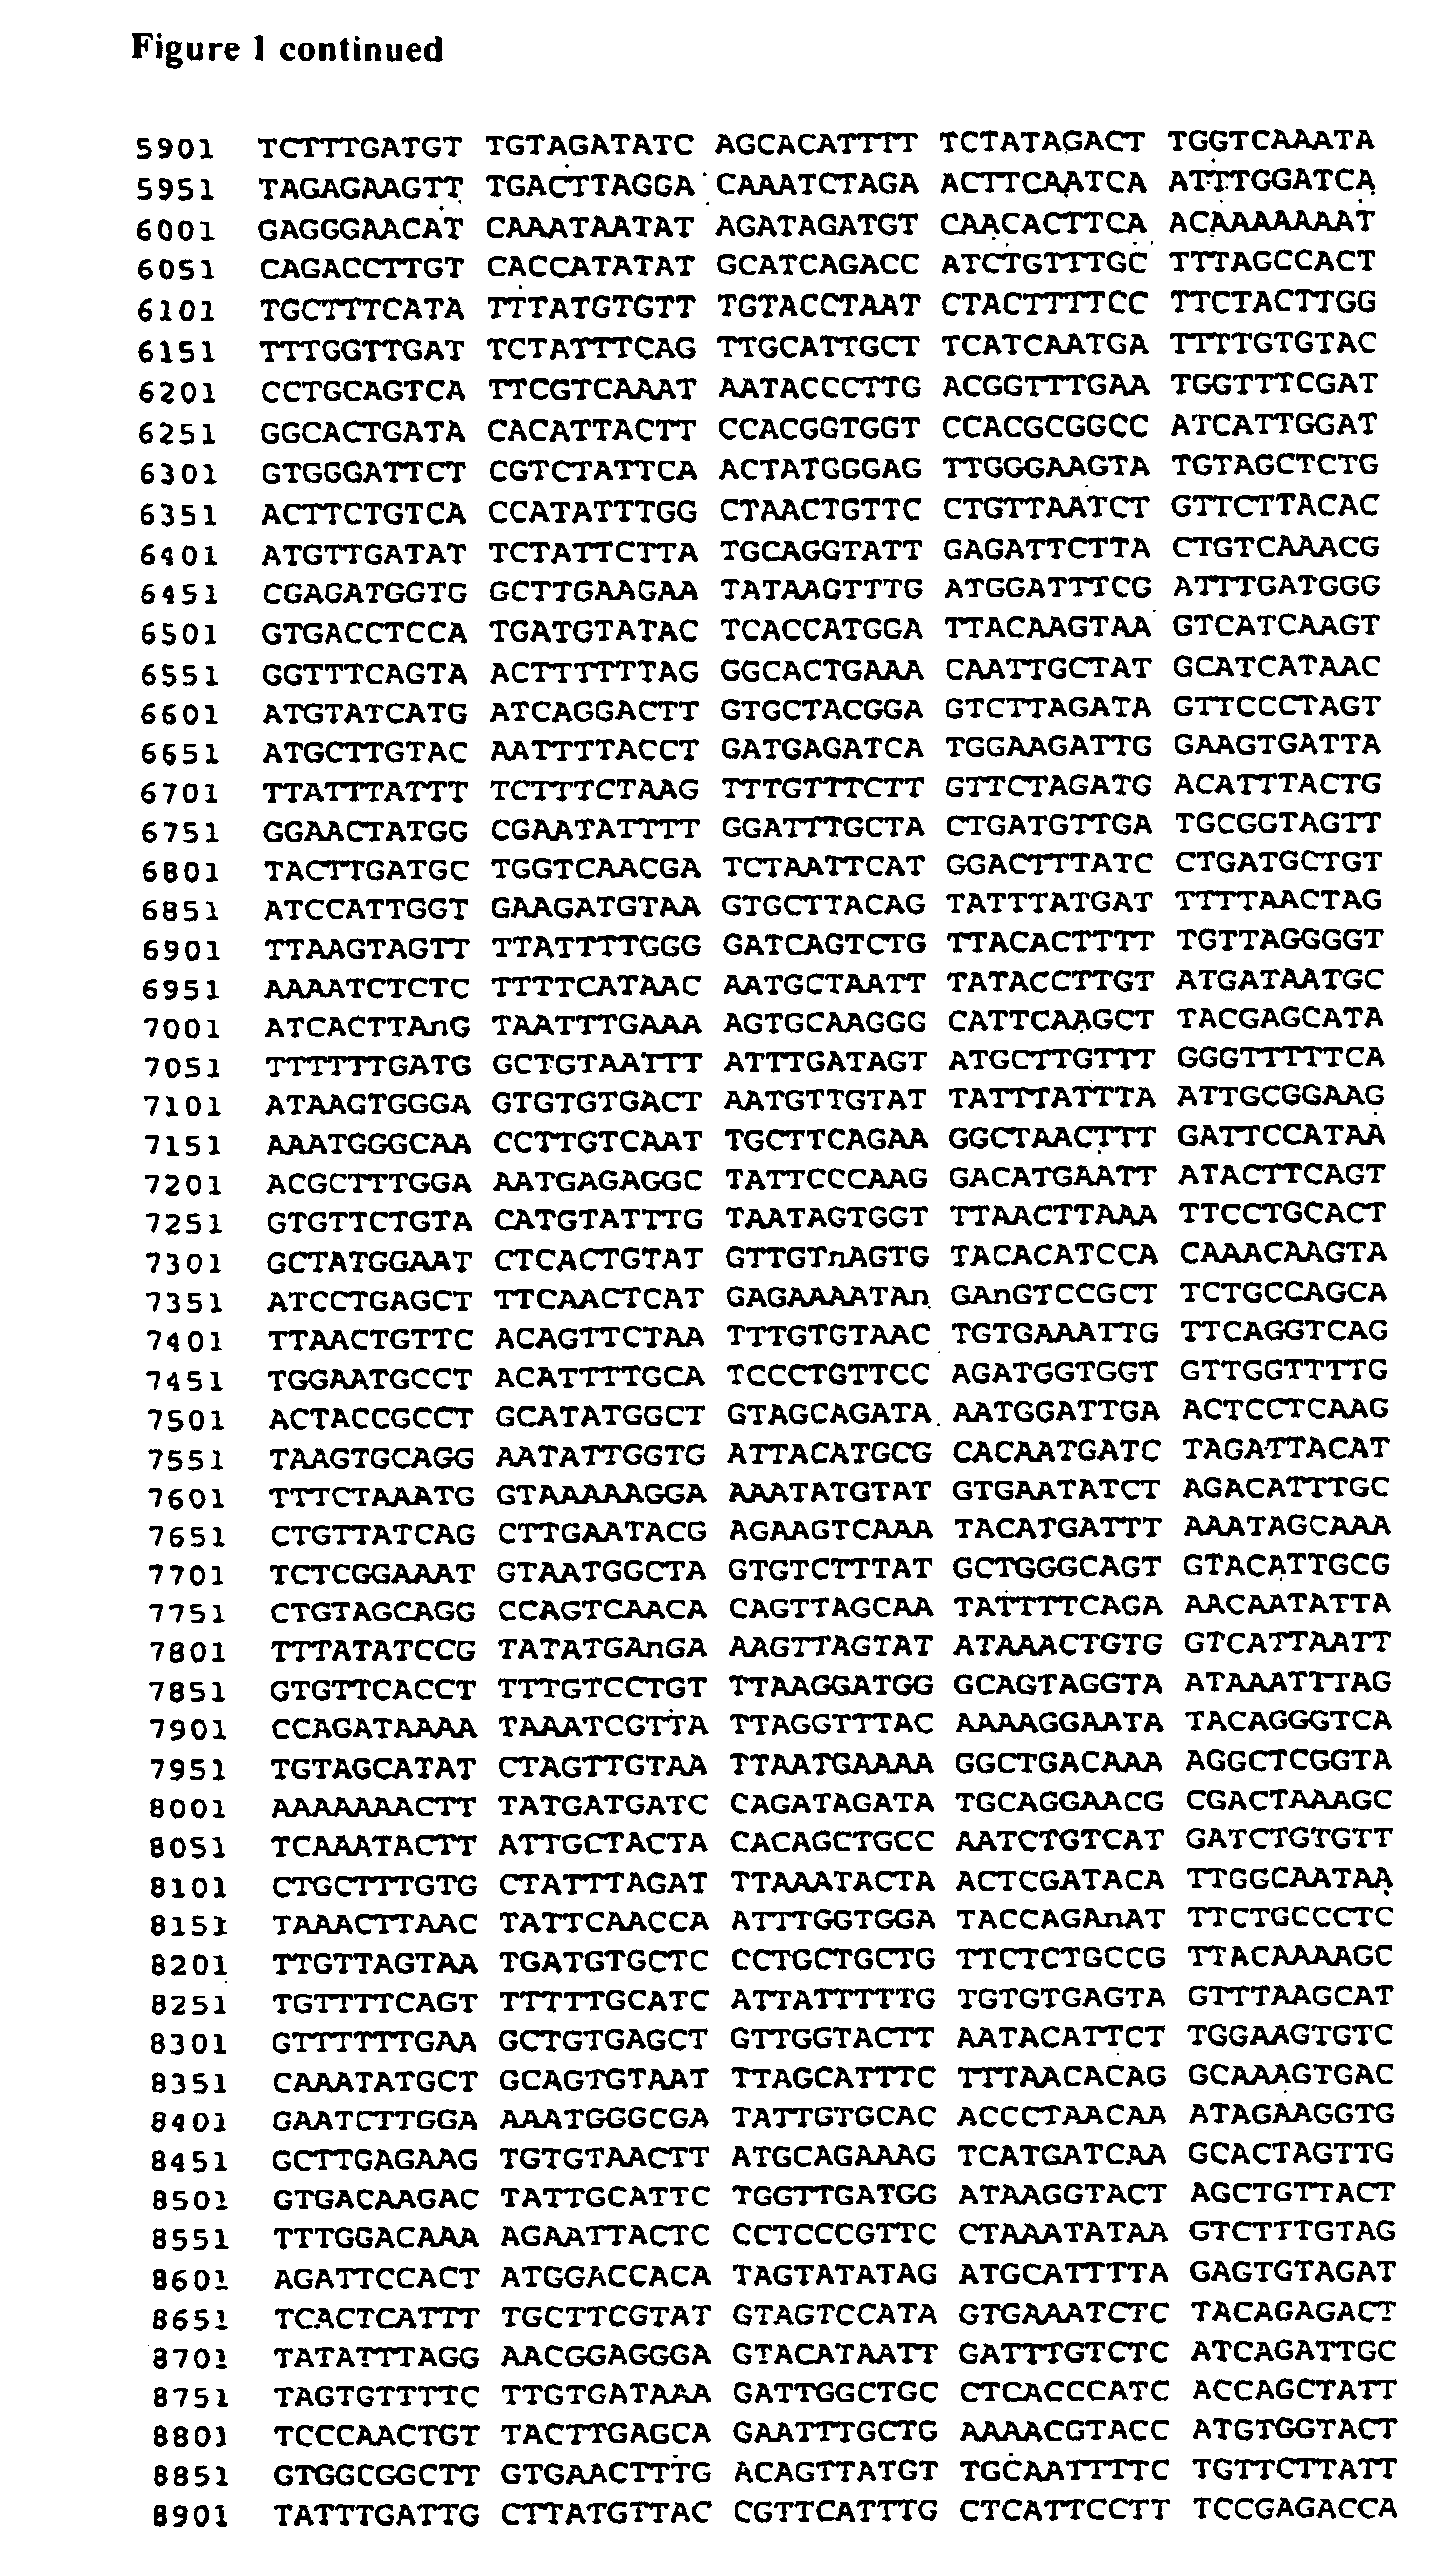 Wheat with altered branching enzyme activity and starch and starch containing products derived therefrom